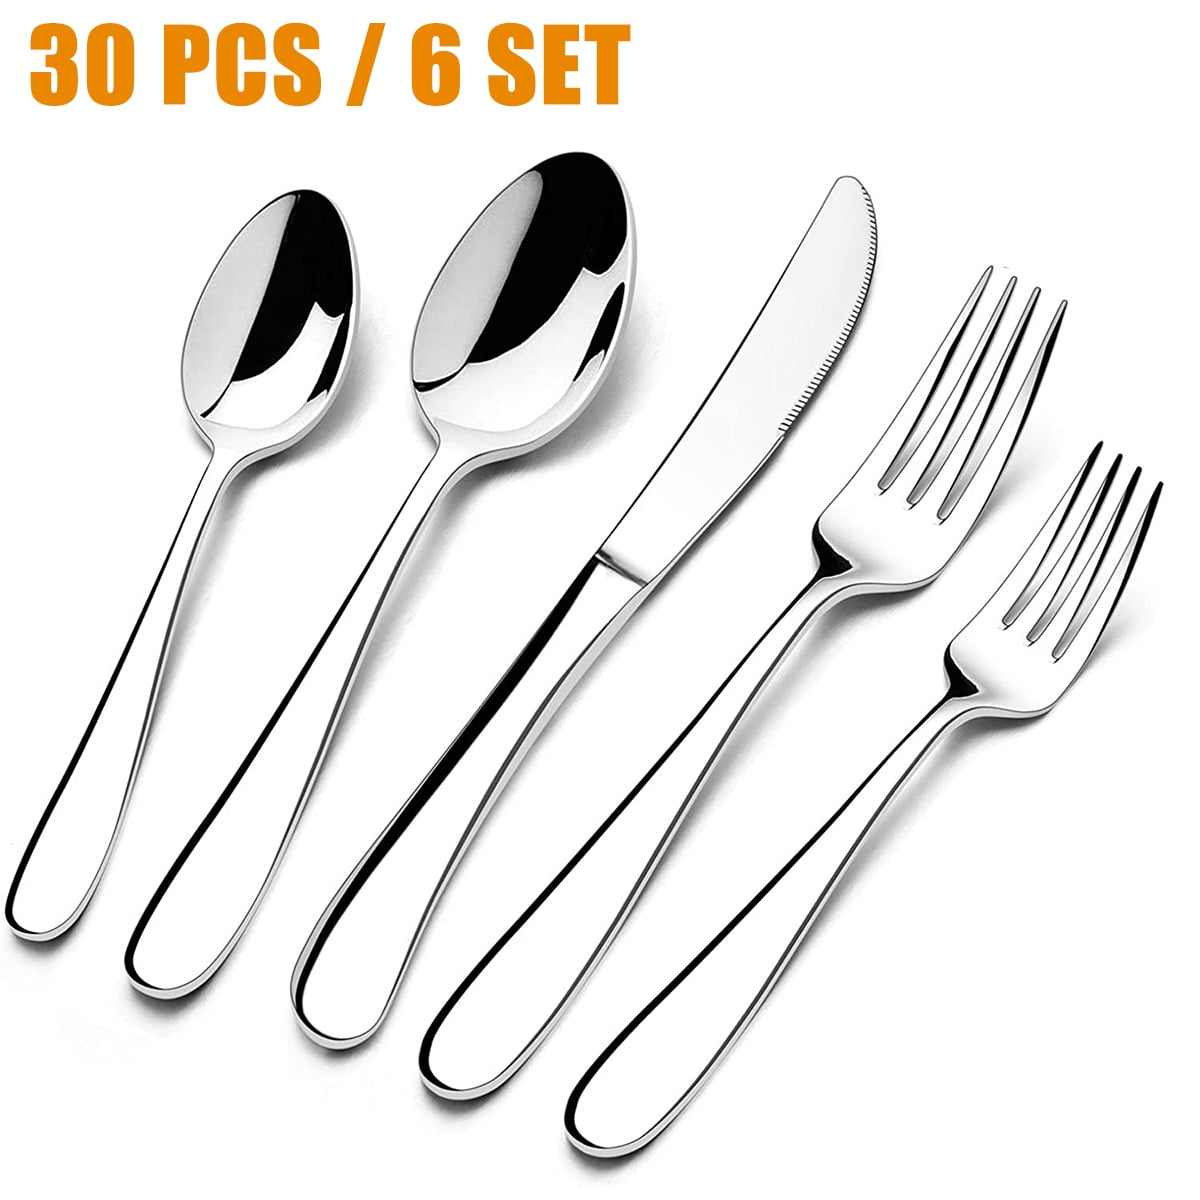 16 Pcs Cutlery Set Stainless Steel Tableware Dining Knives Forks Spoons 